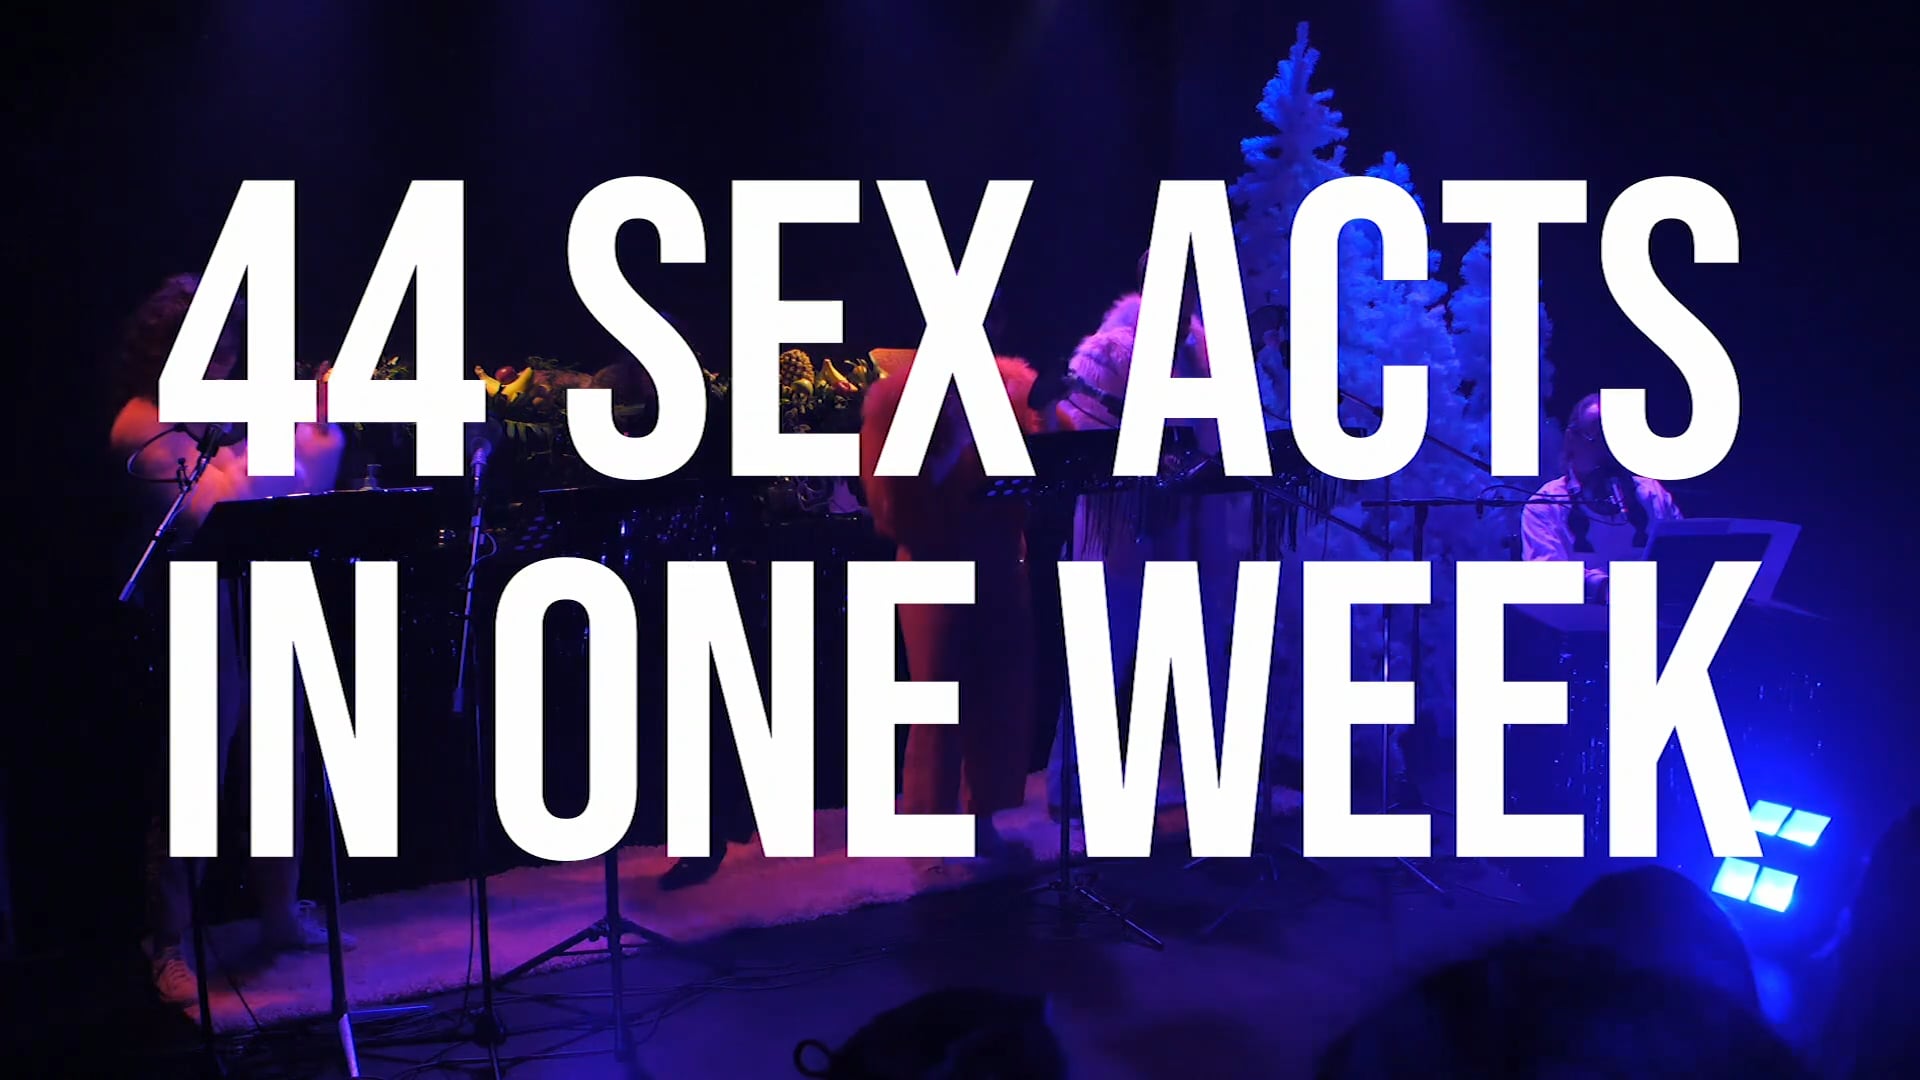 44 Sex Acts In One Week Belvoir Theatre On Vimeo